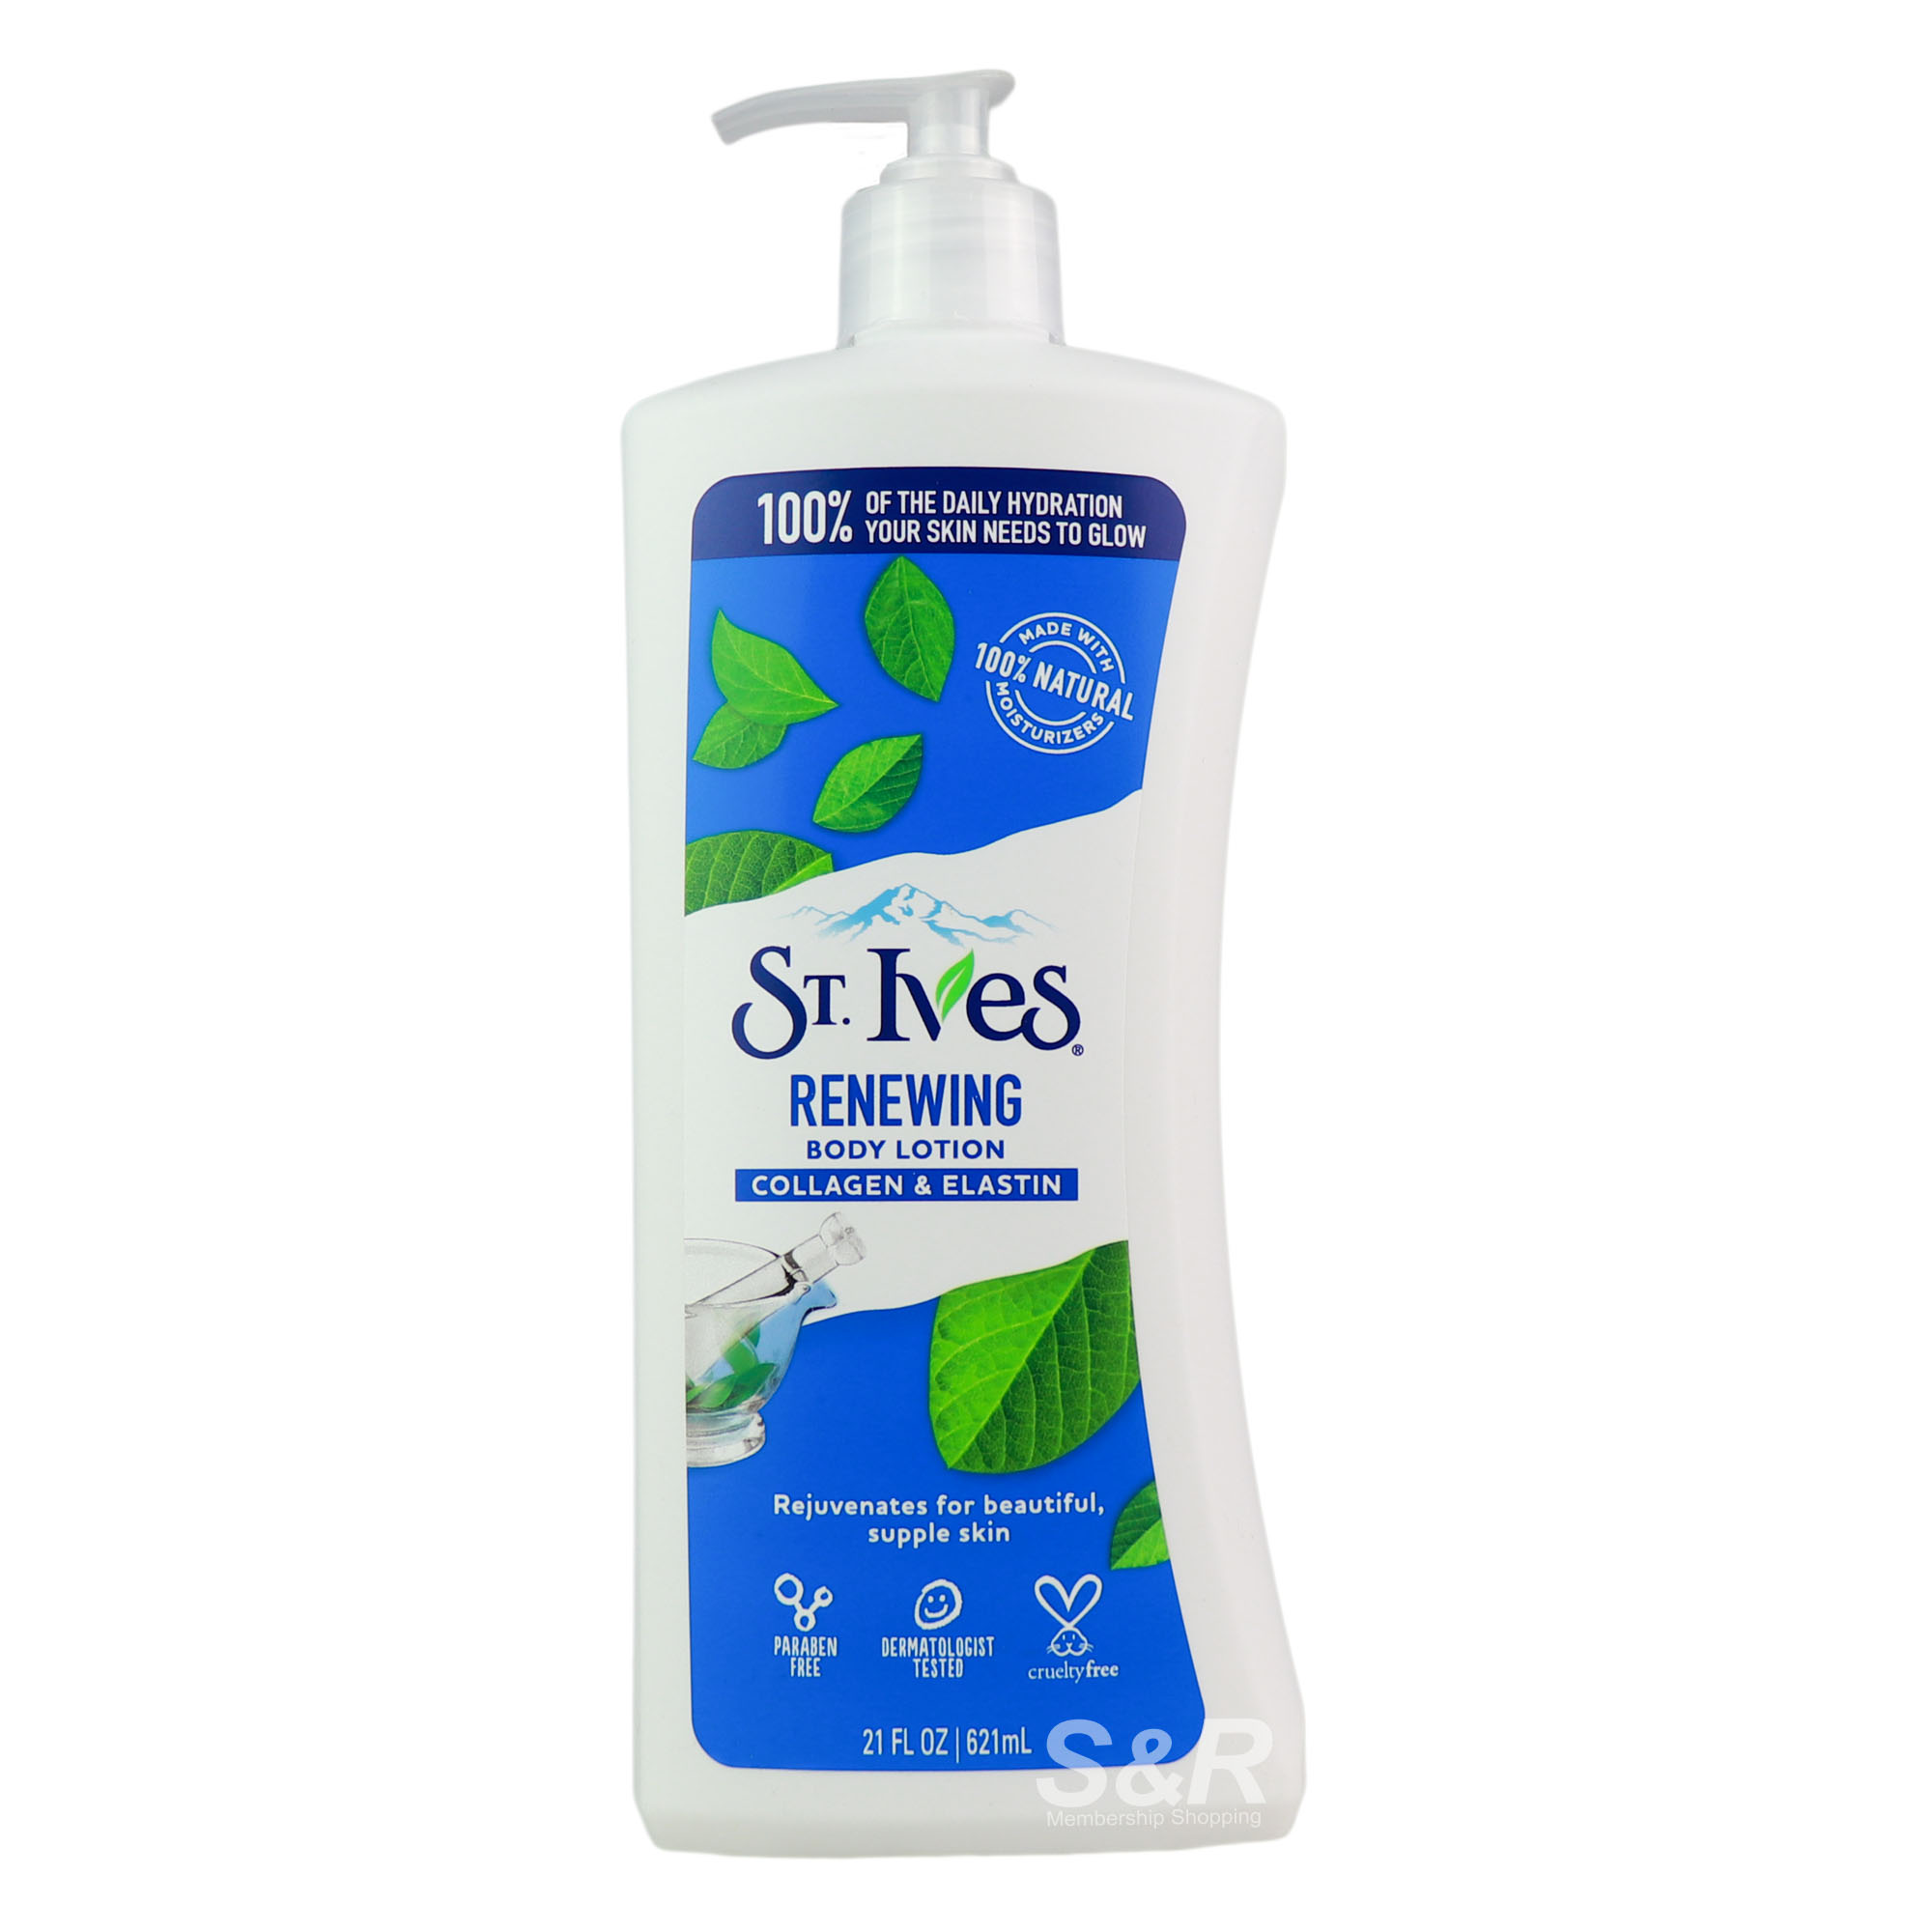 St. Ives Renewing Body Lotion 621mL